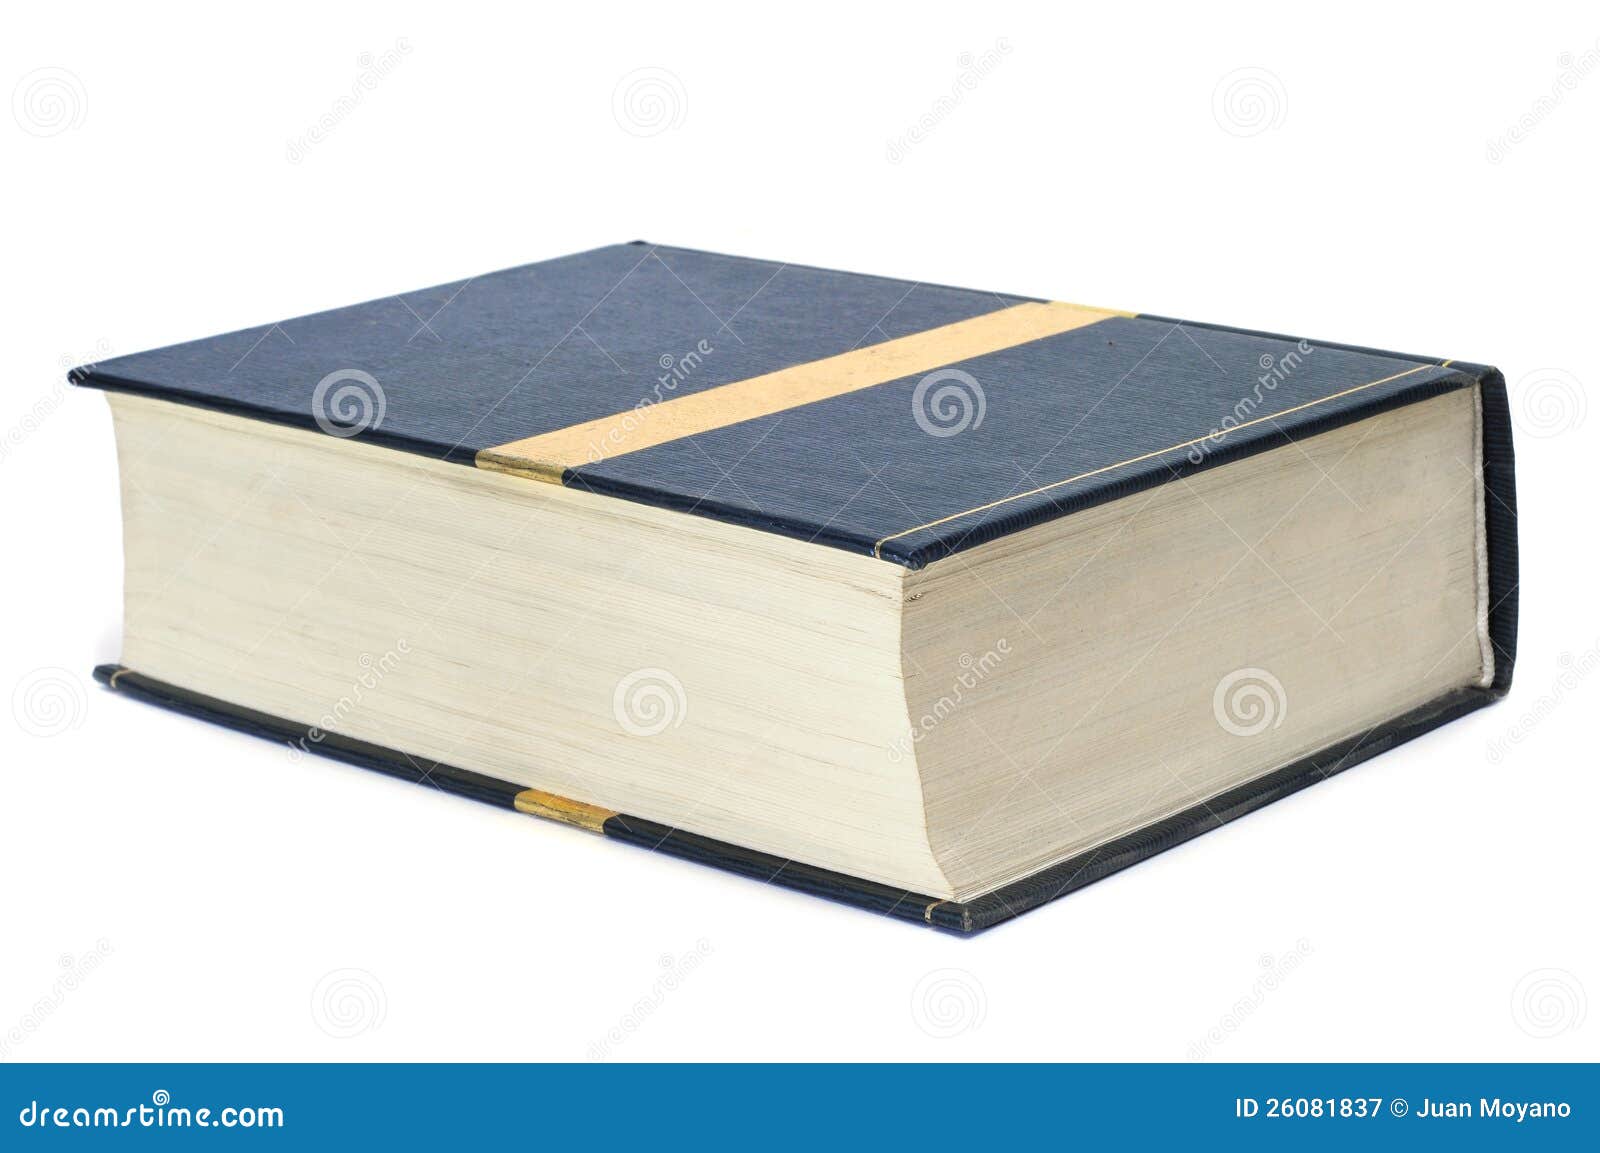 clipart thick book - photo #10